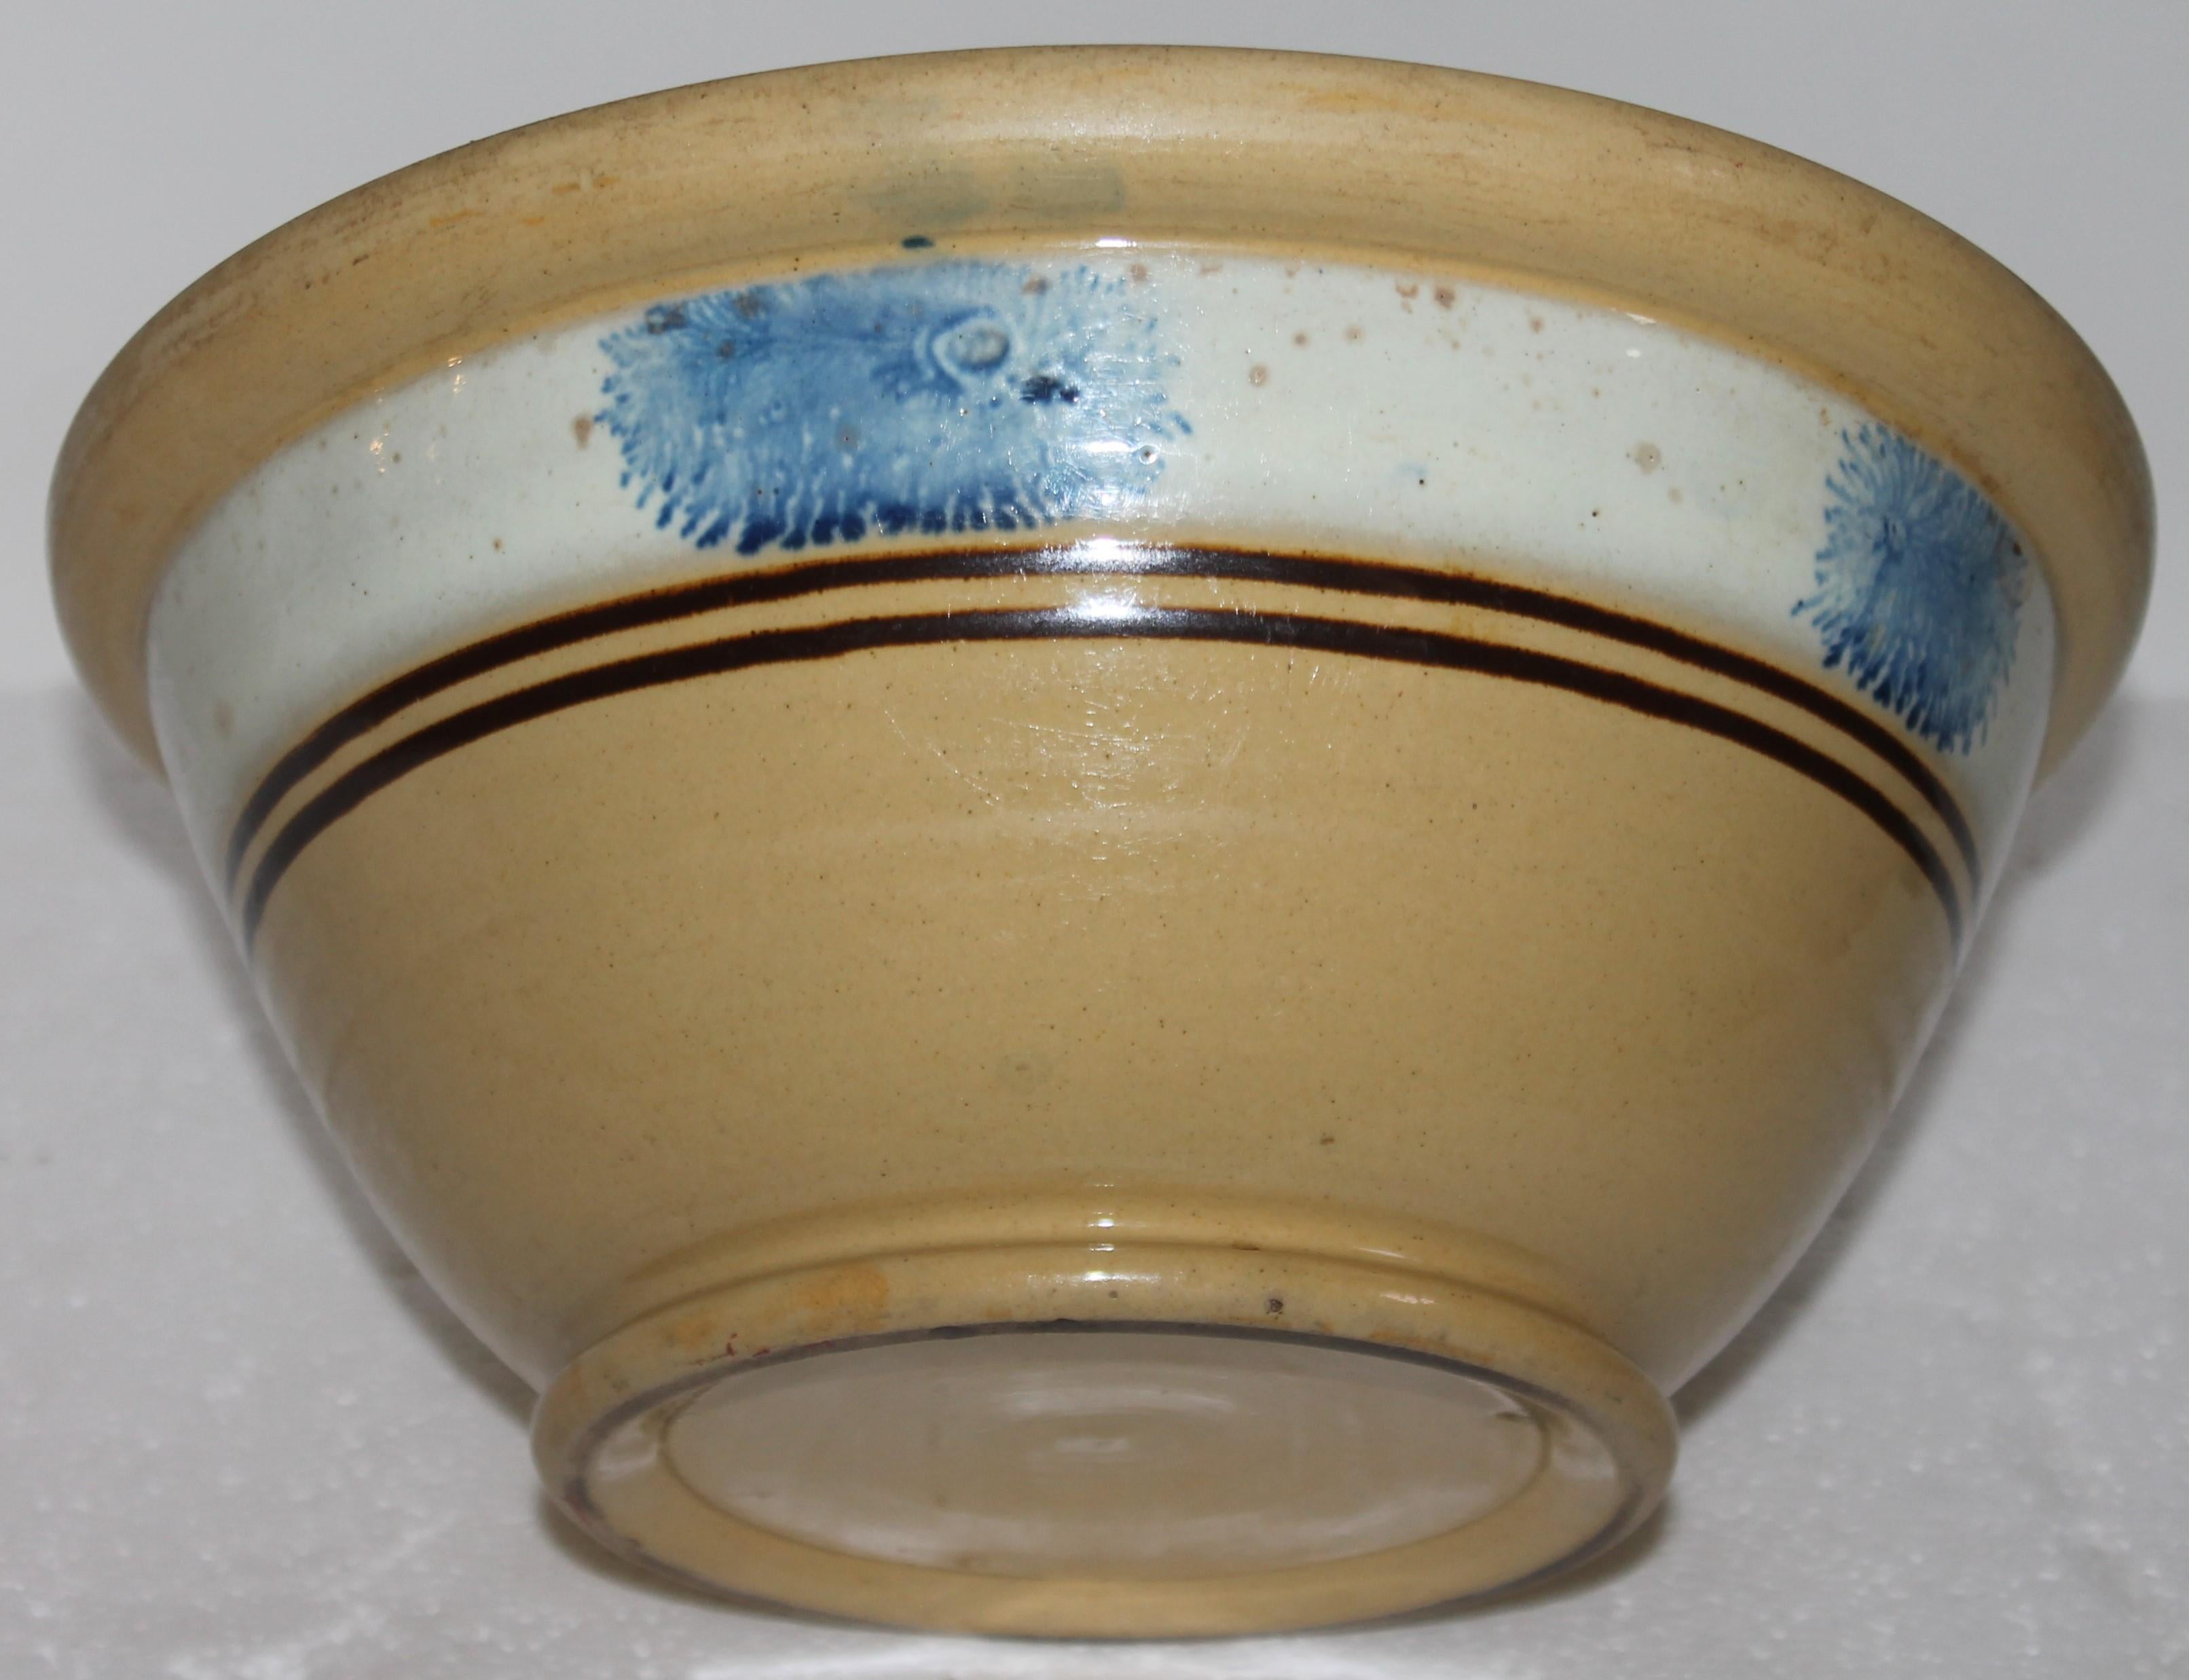 19Thc yellow ware mocha blue seaweed pattern mixing bowl in pristine condition.